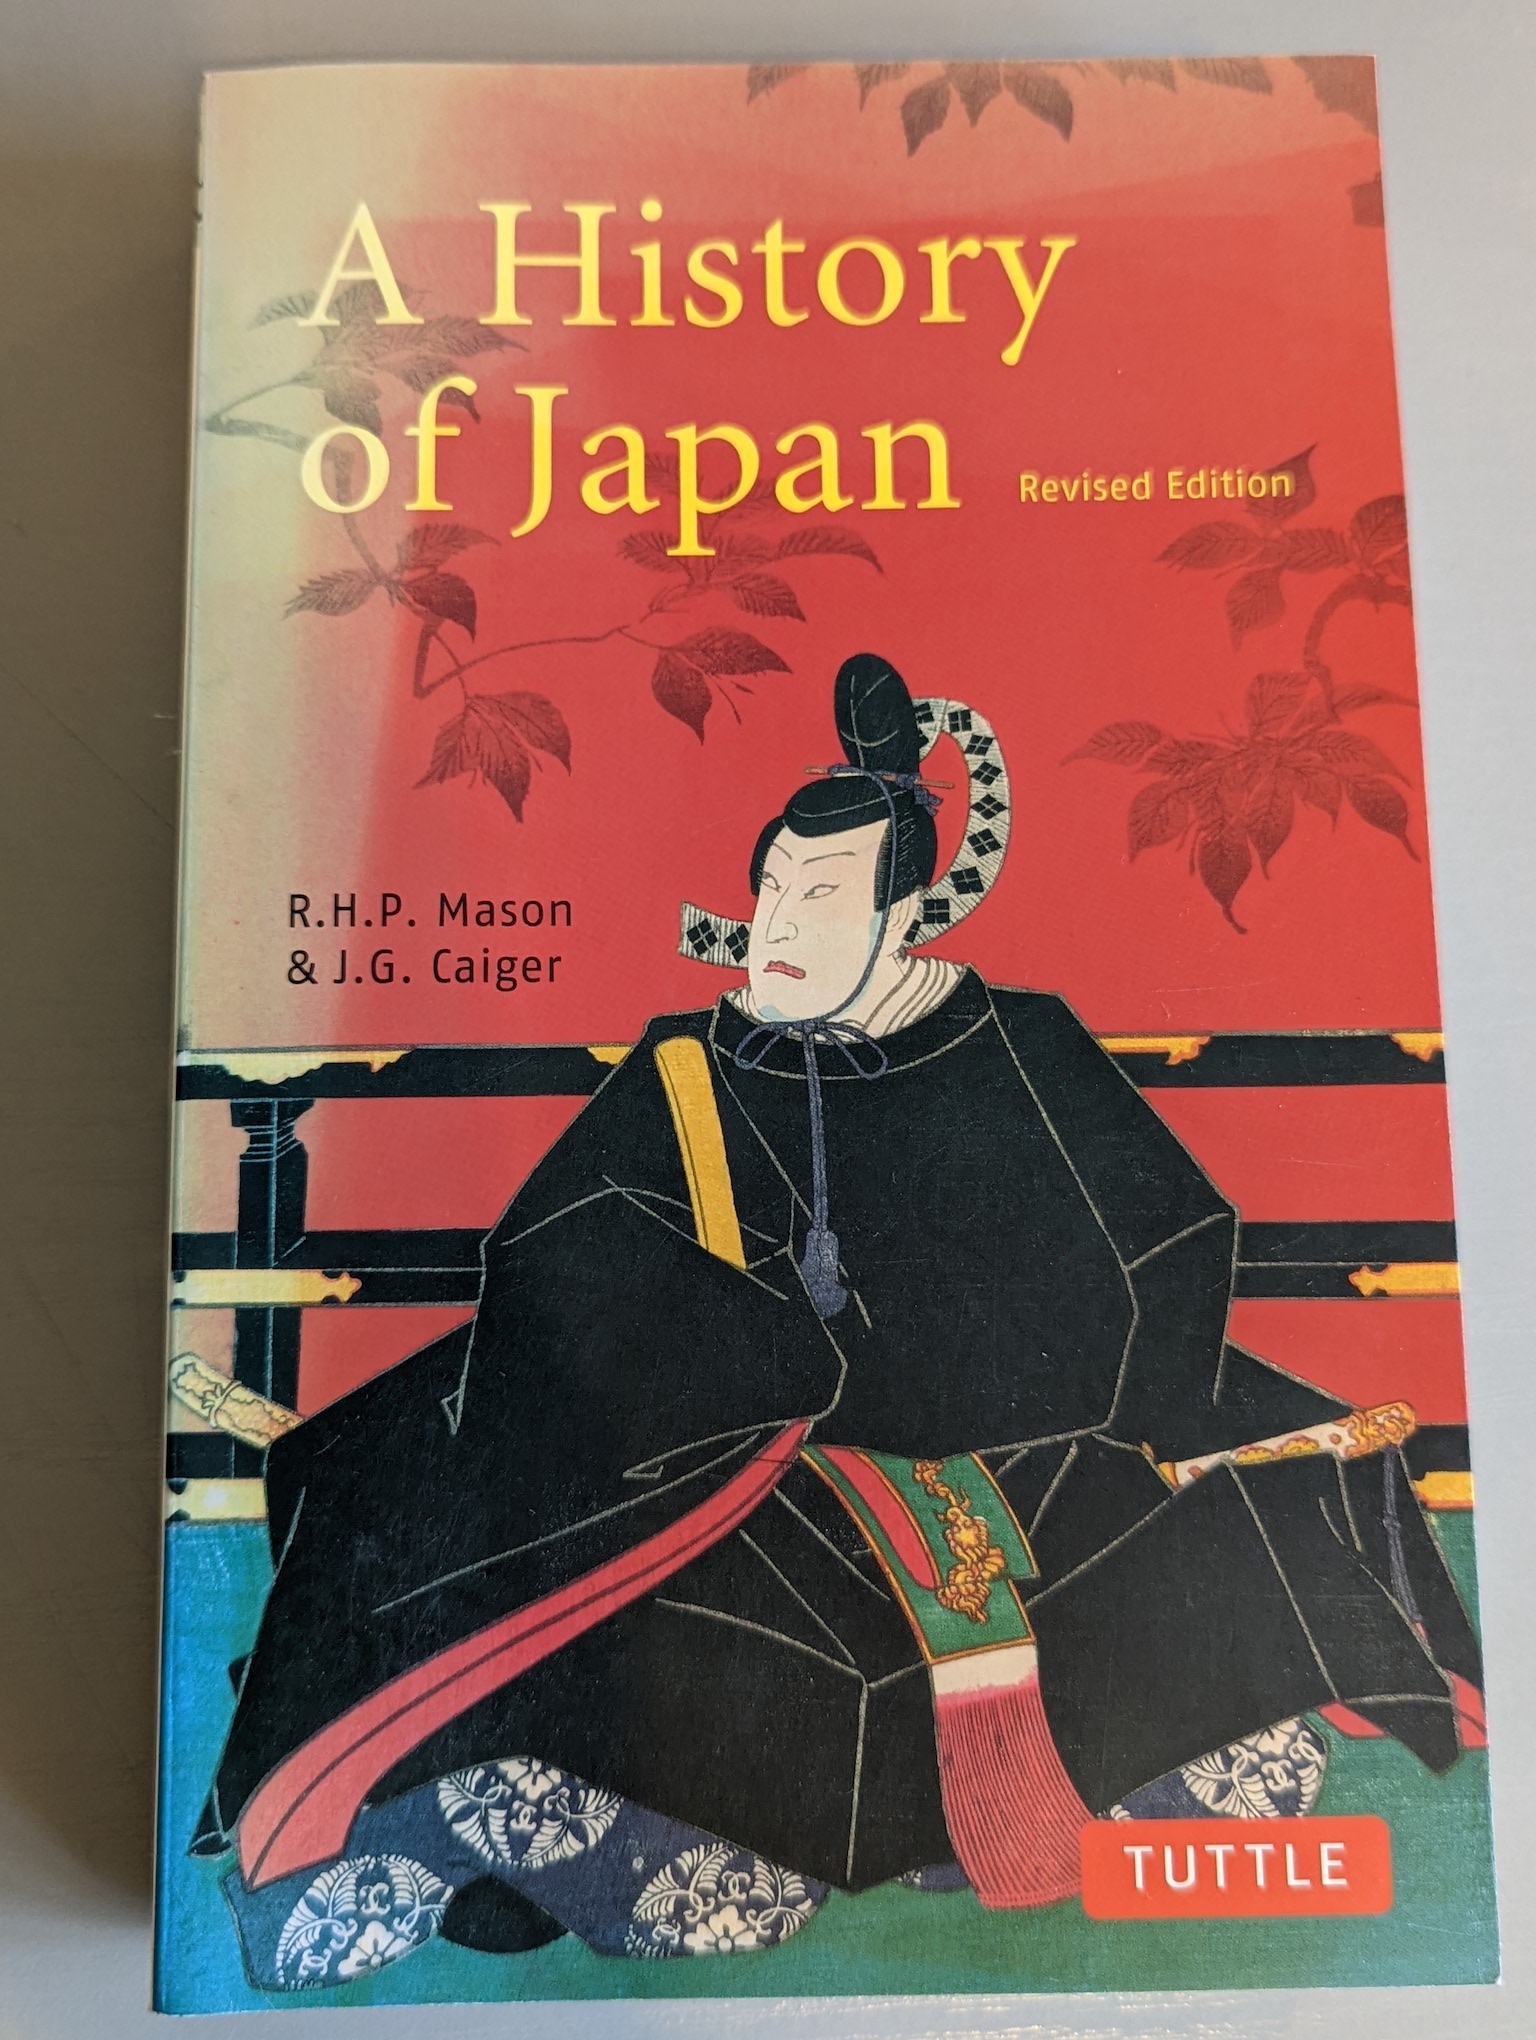 BOOK: A History of Japan by R.H.P. Mason & J.G. Caiger